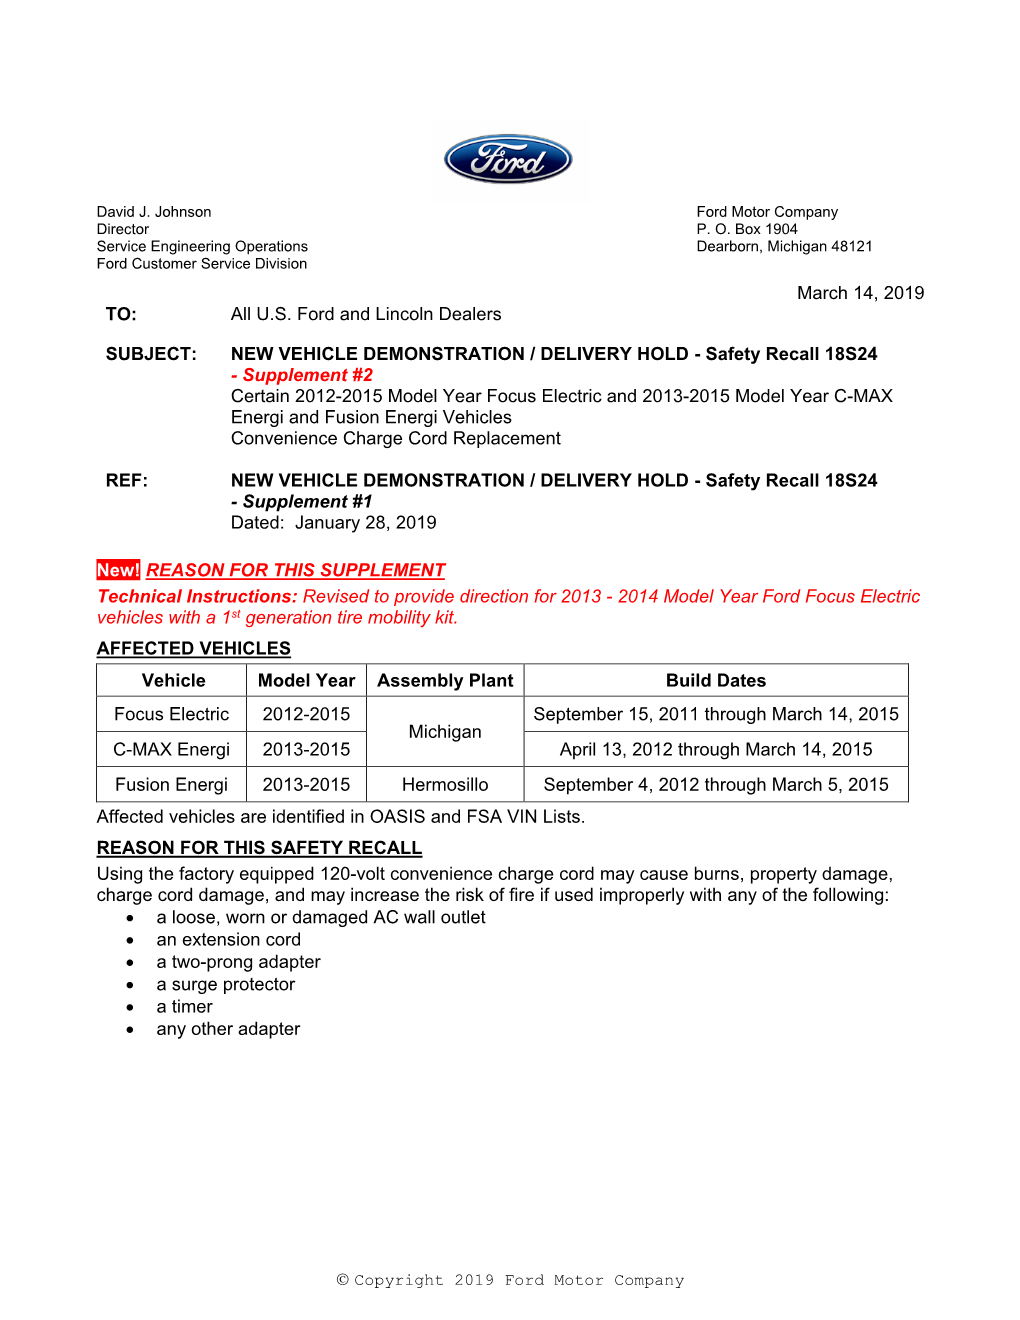 March 14, 2019 TO: All U.S. Ford and Lincoln Dealers SUBJECT: NEW VEHICLE DEMONSTRATION / DELIVERY HOLD